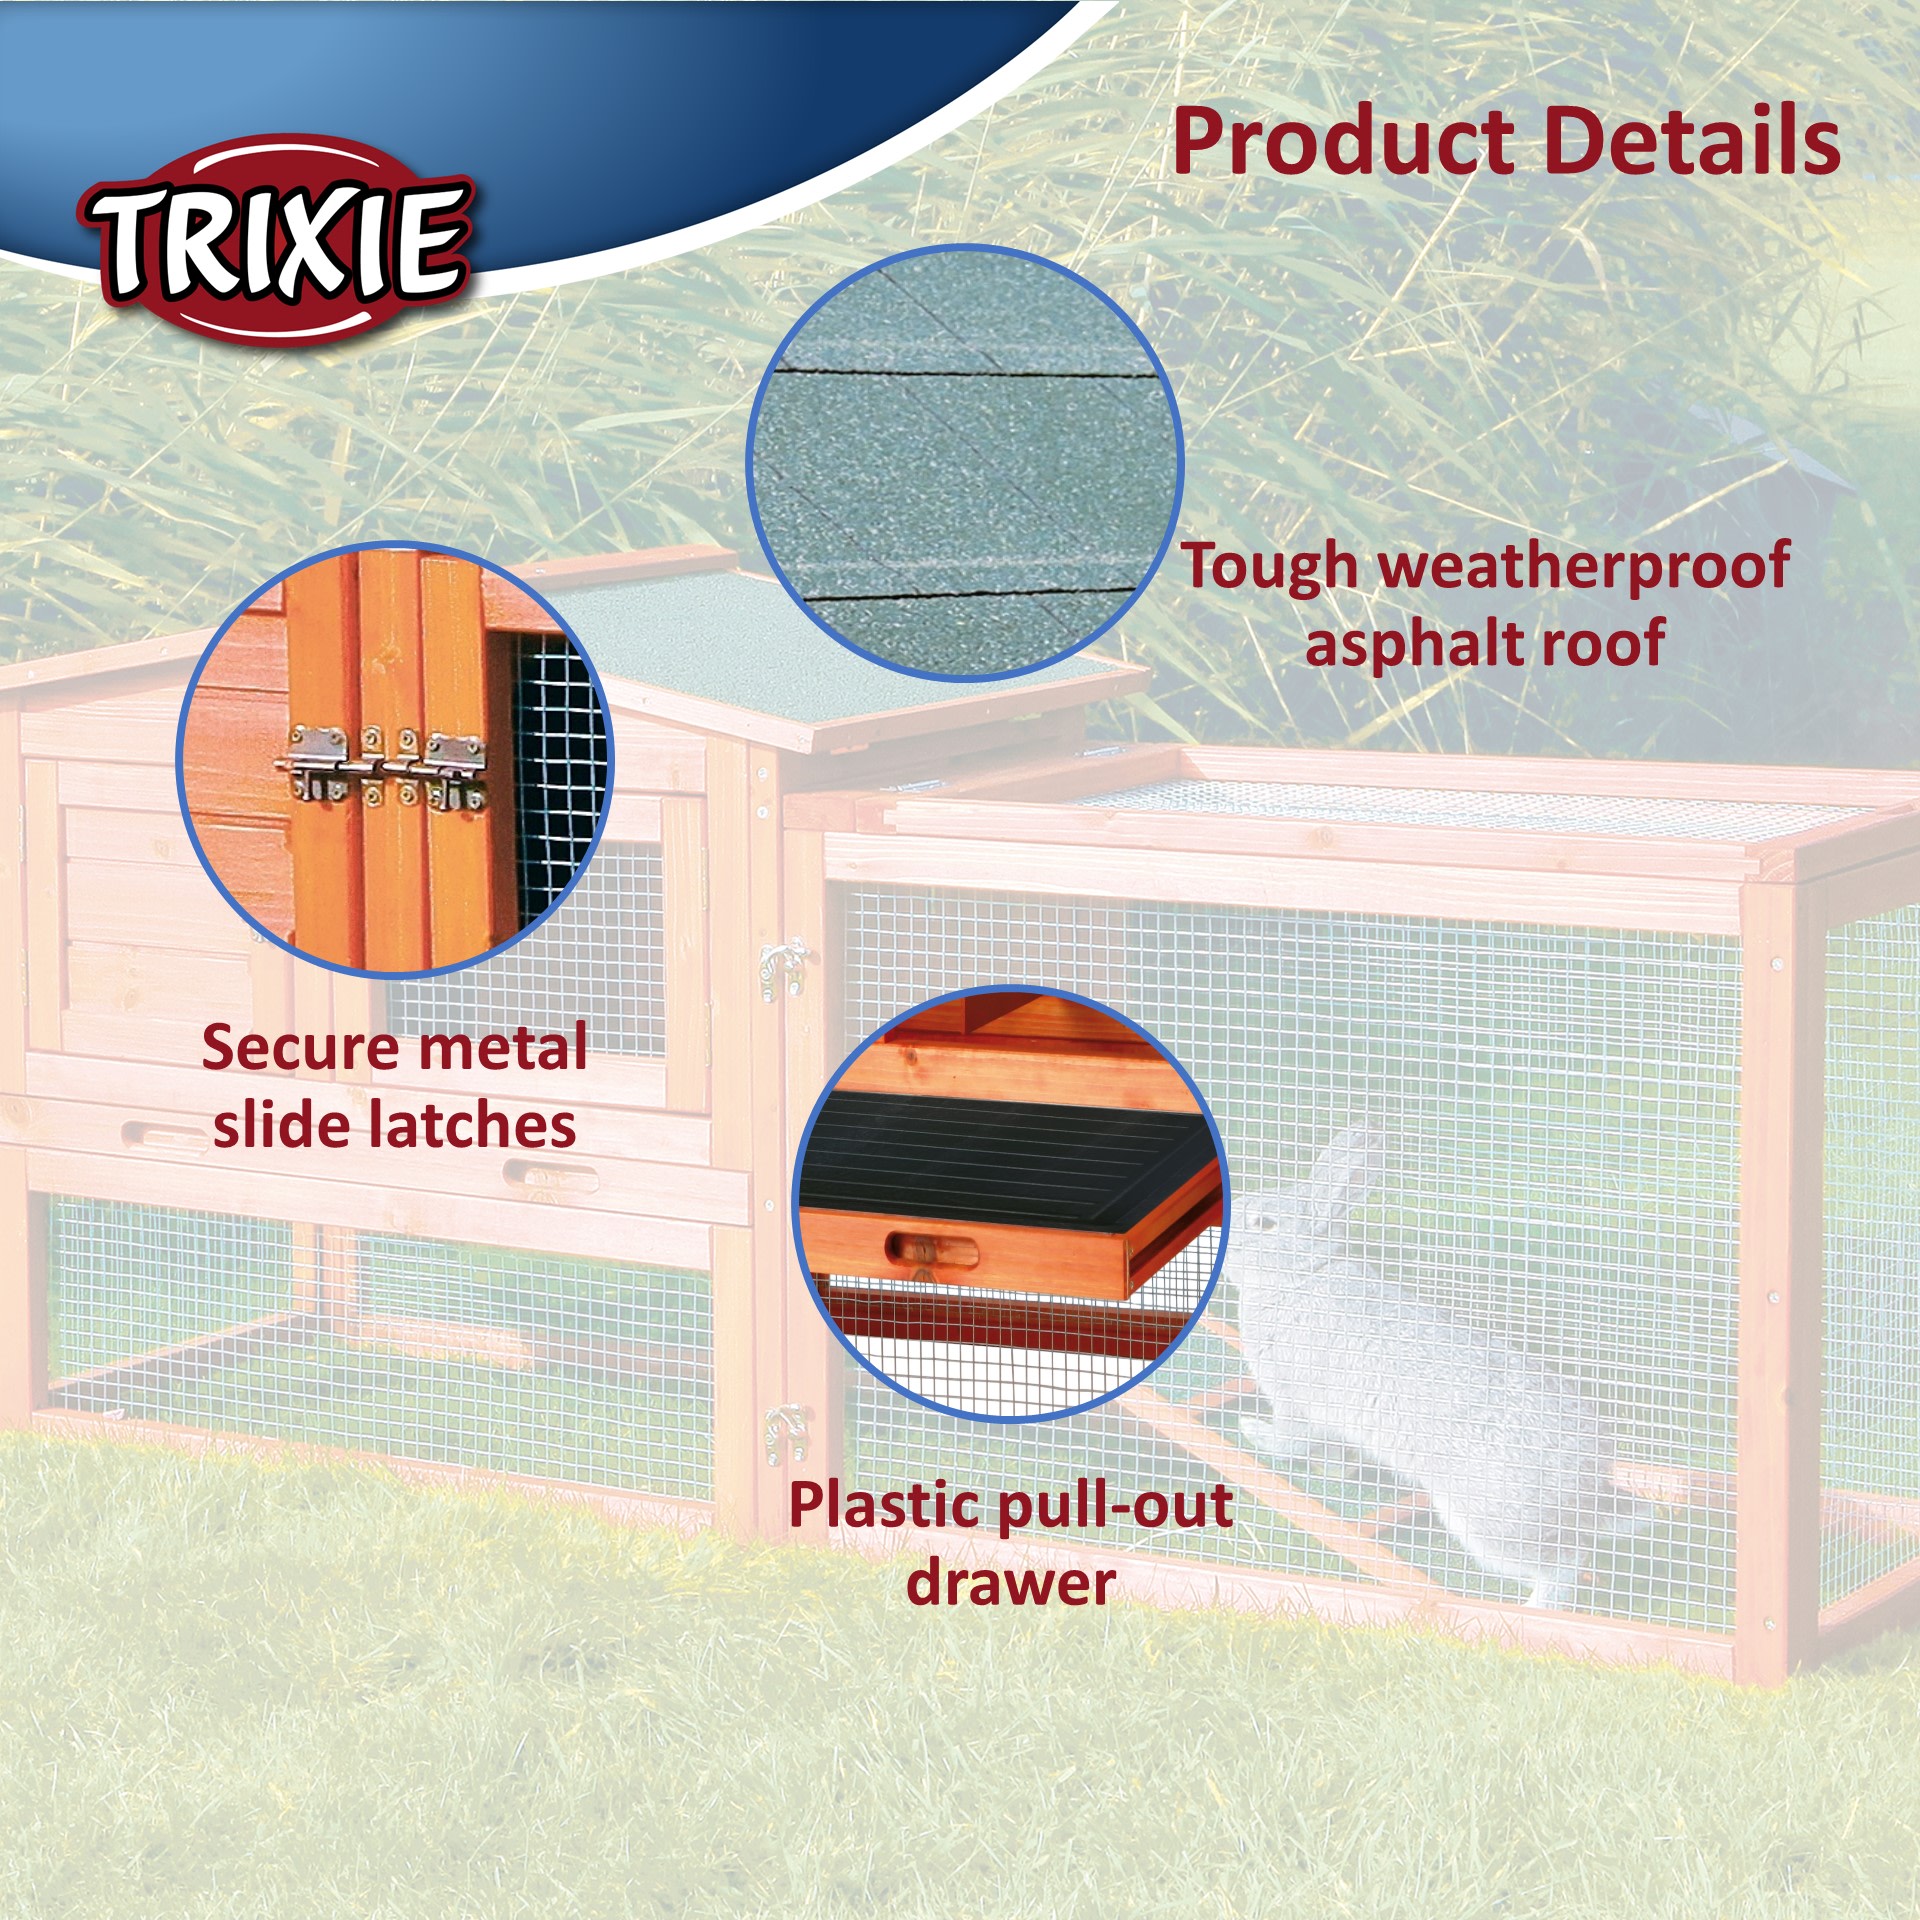 TRIXIE Weatherproof Outdoor 2-Story Wooden Small Animal Hutch, Run & Pull-Out Tray, Brown - image 3 of 6